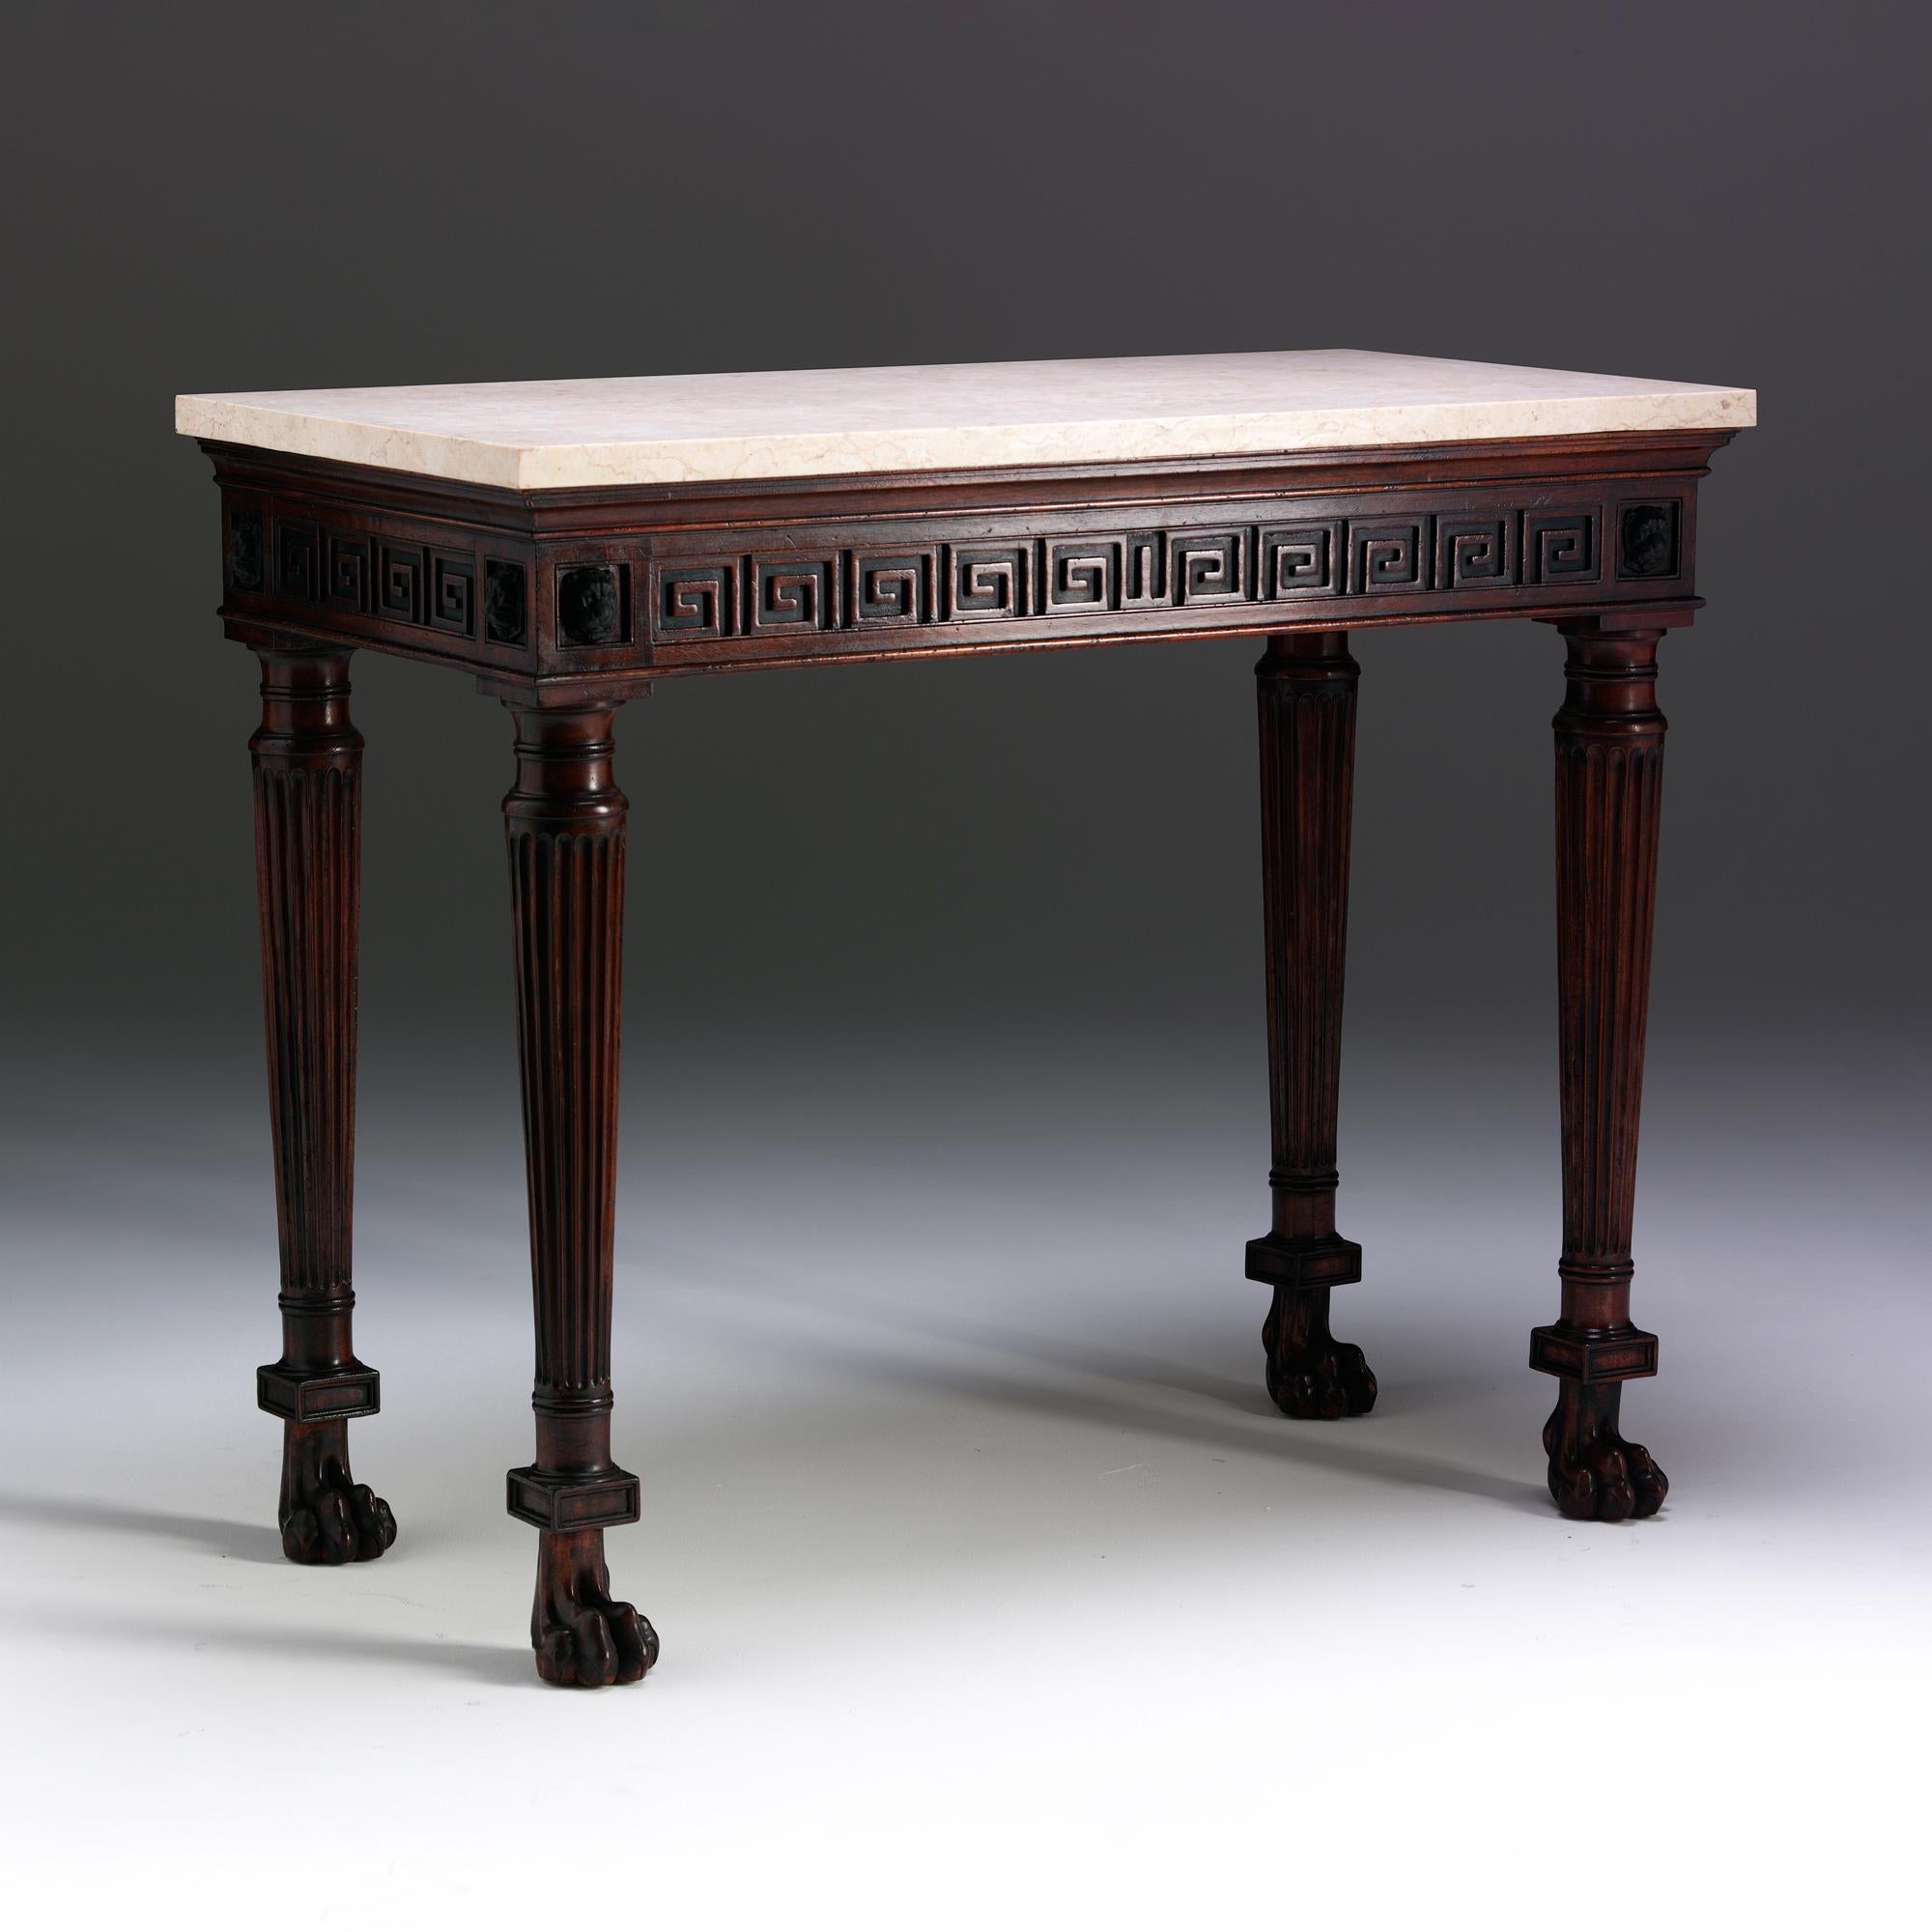 This console table displays the best classical inspiration of the Regency period. In this example the white marble top sits above a moulded frieze carved with Greek key patterned blind fretwork flanked by carved leopard head masks. The tapered and